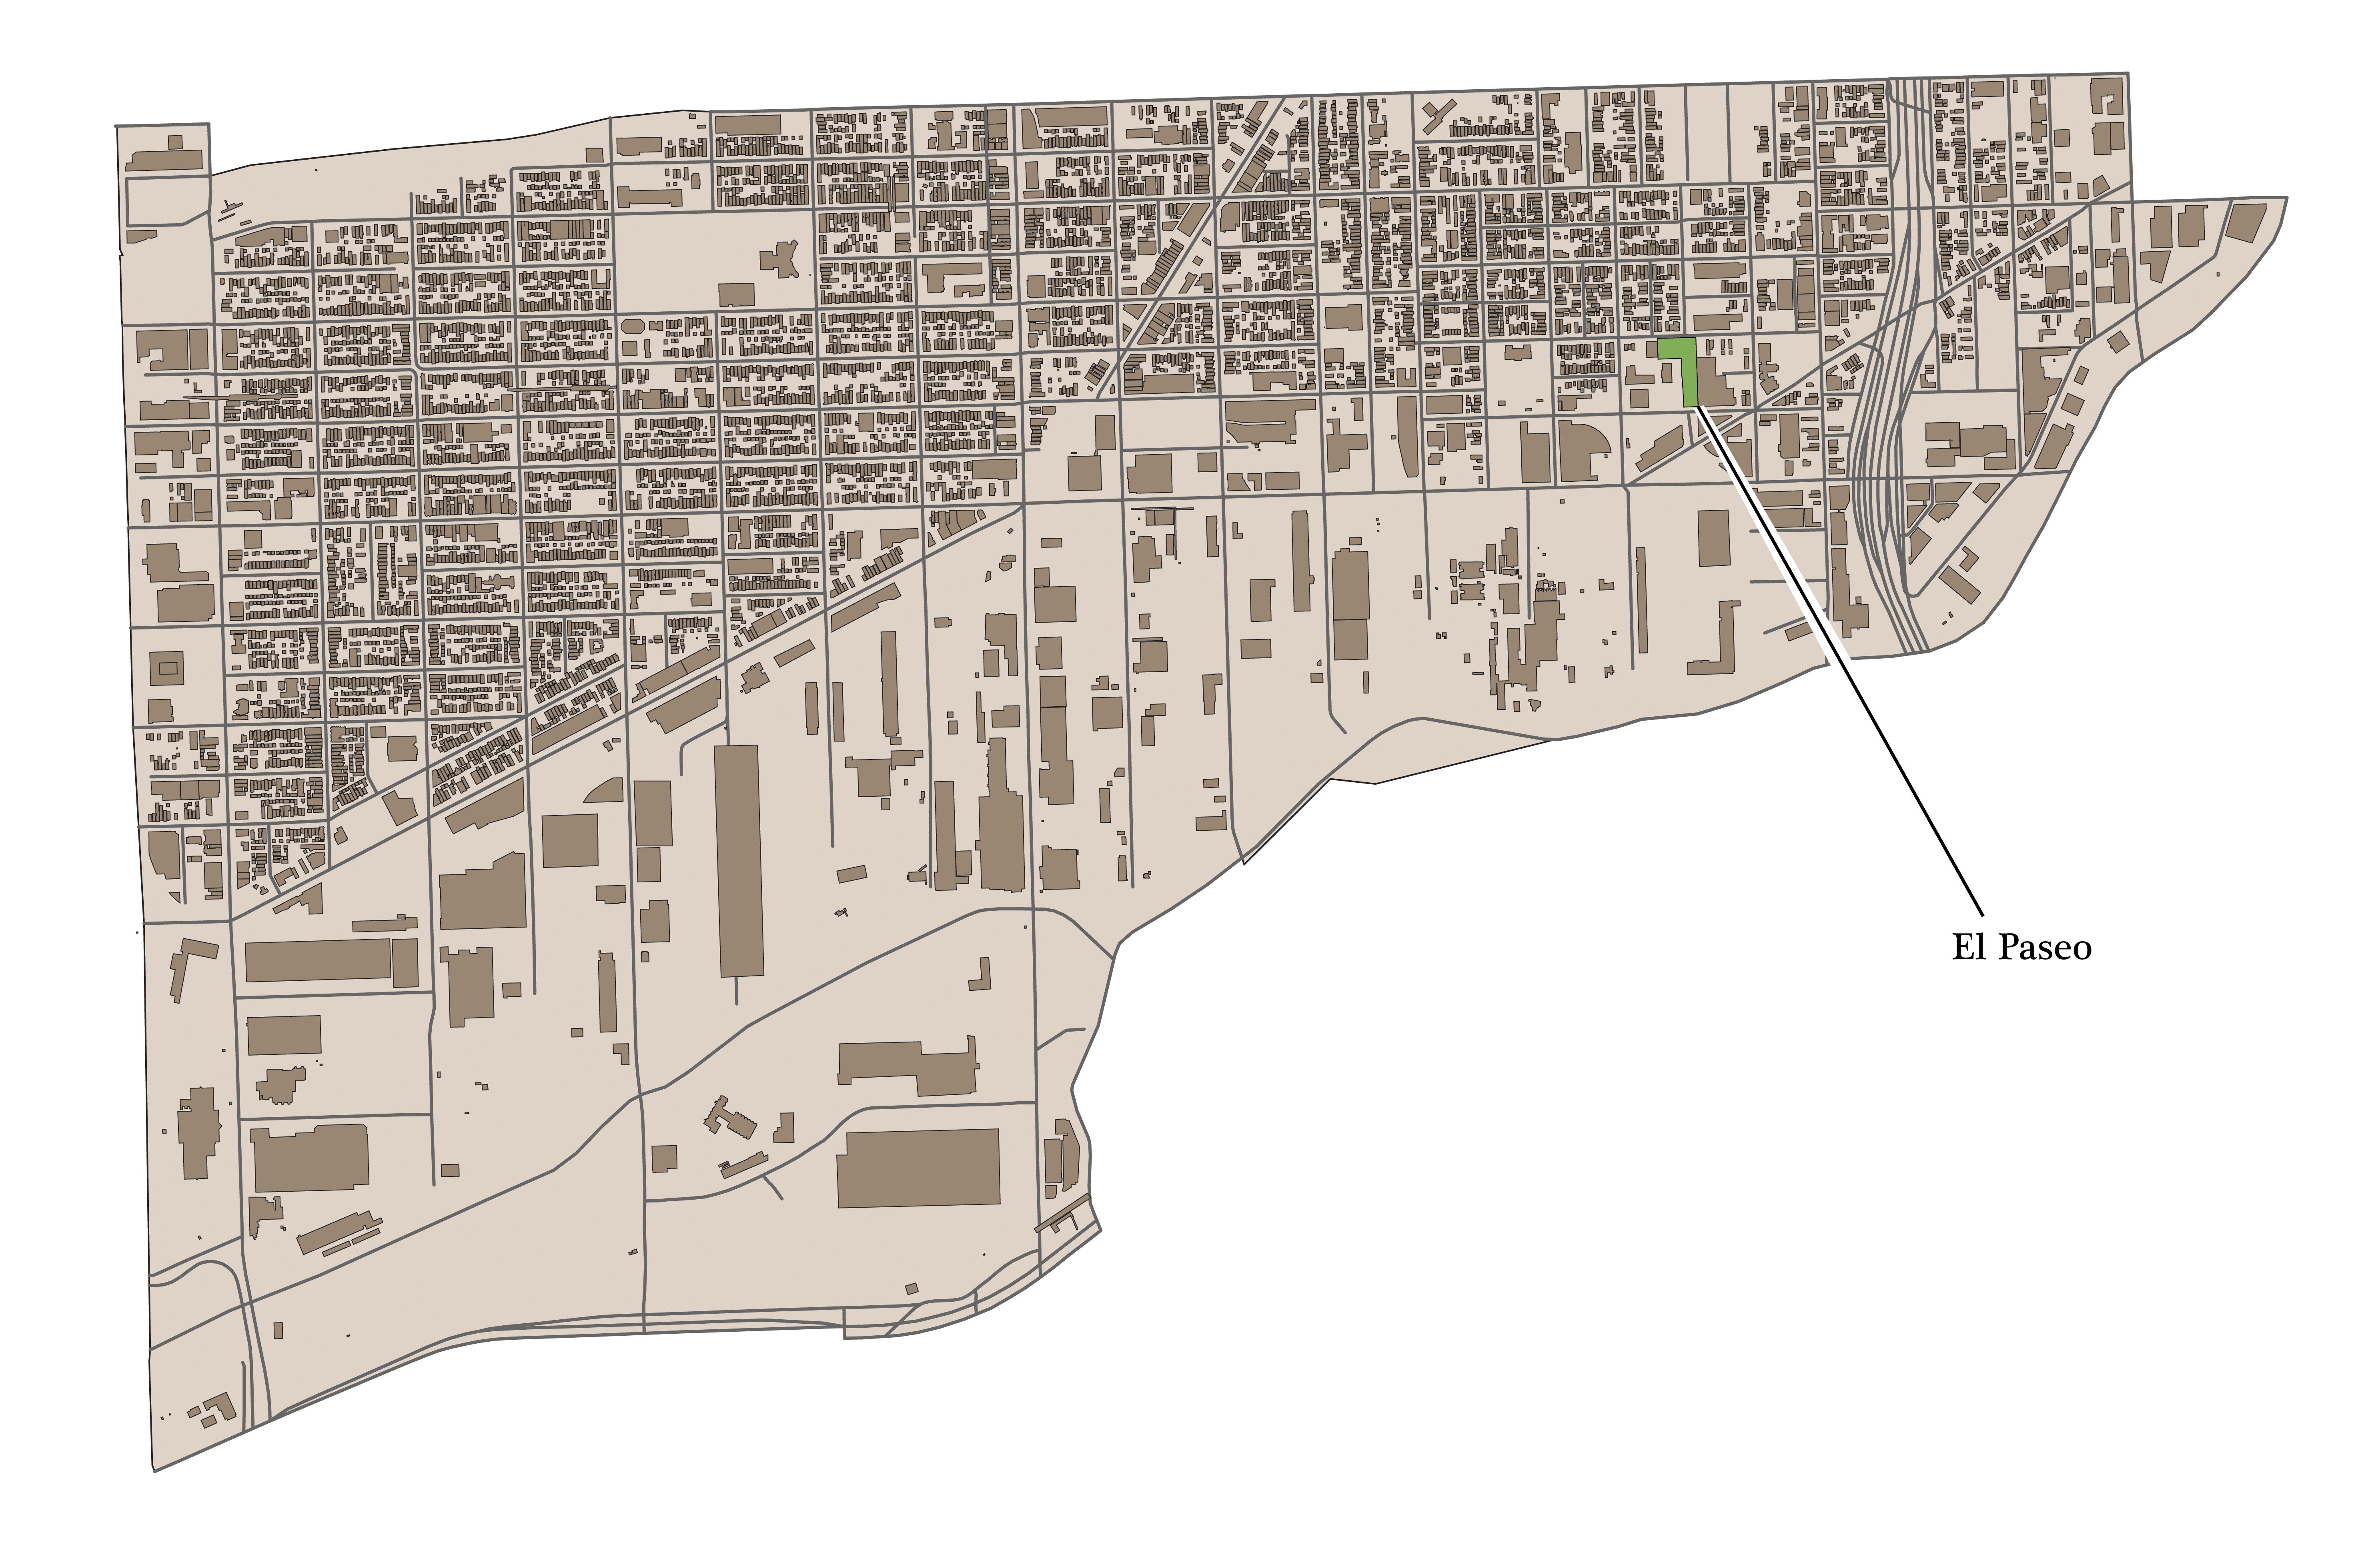 A map of Pilsen created by Griffin Seyfreid that shows the location of the El Paseo Community Garden in the Eastern section of Pilsen.